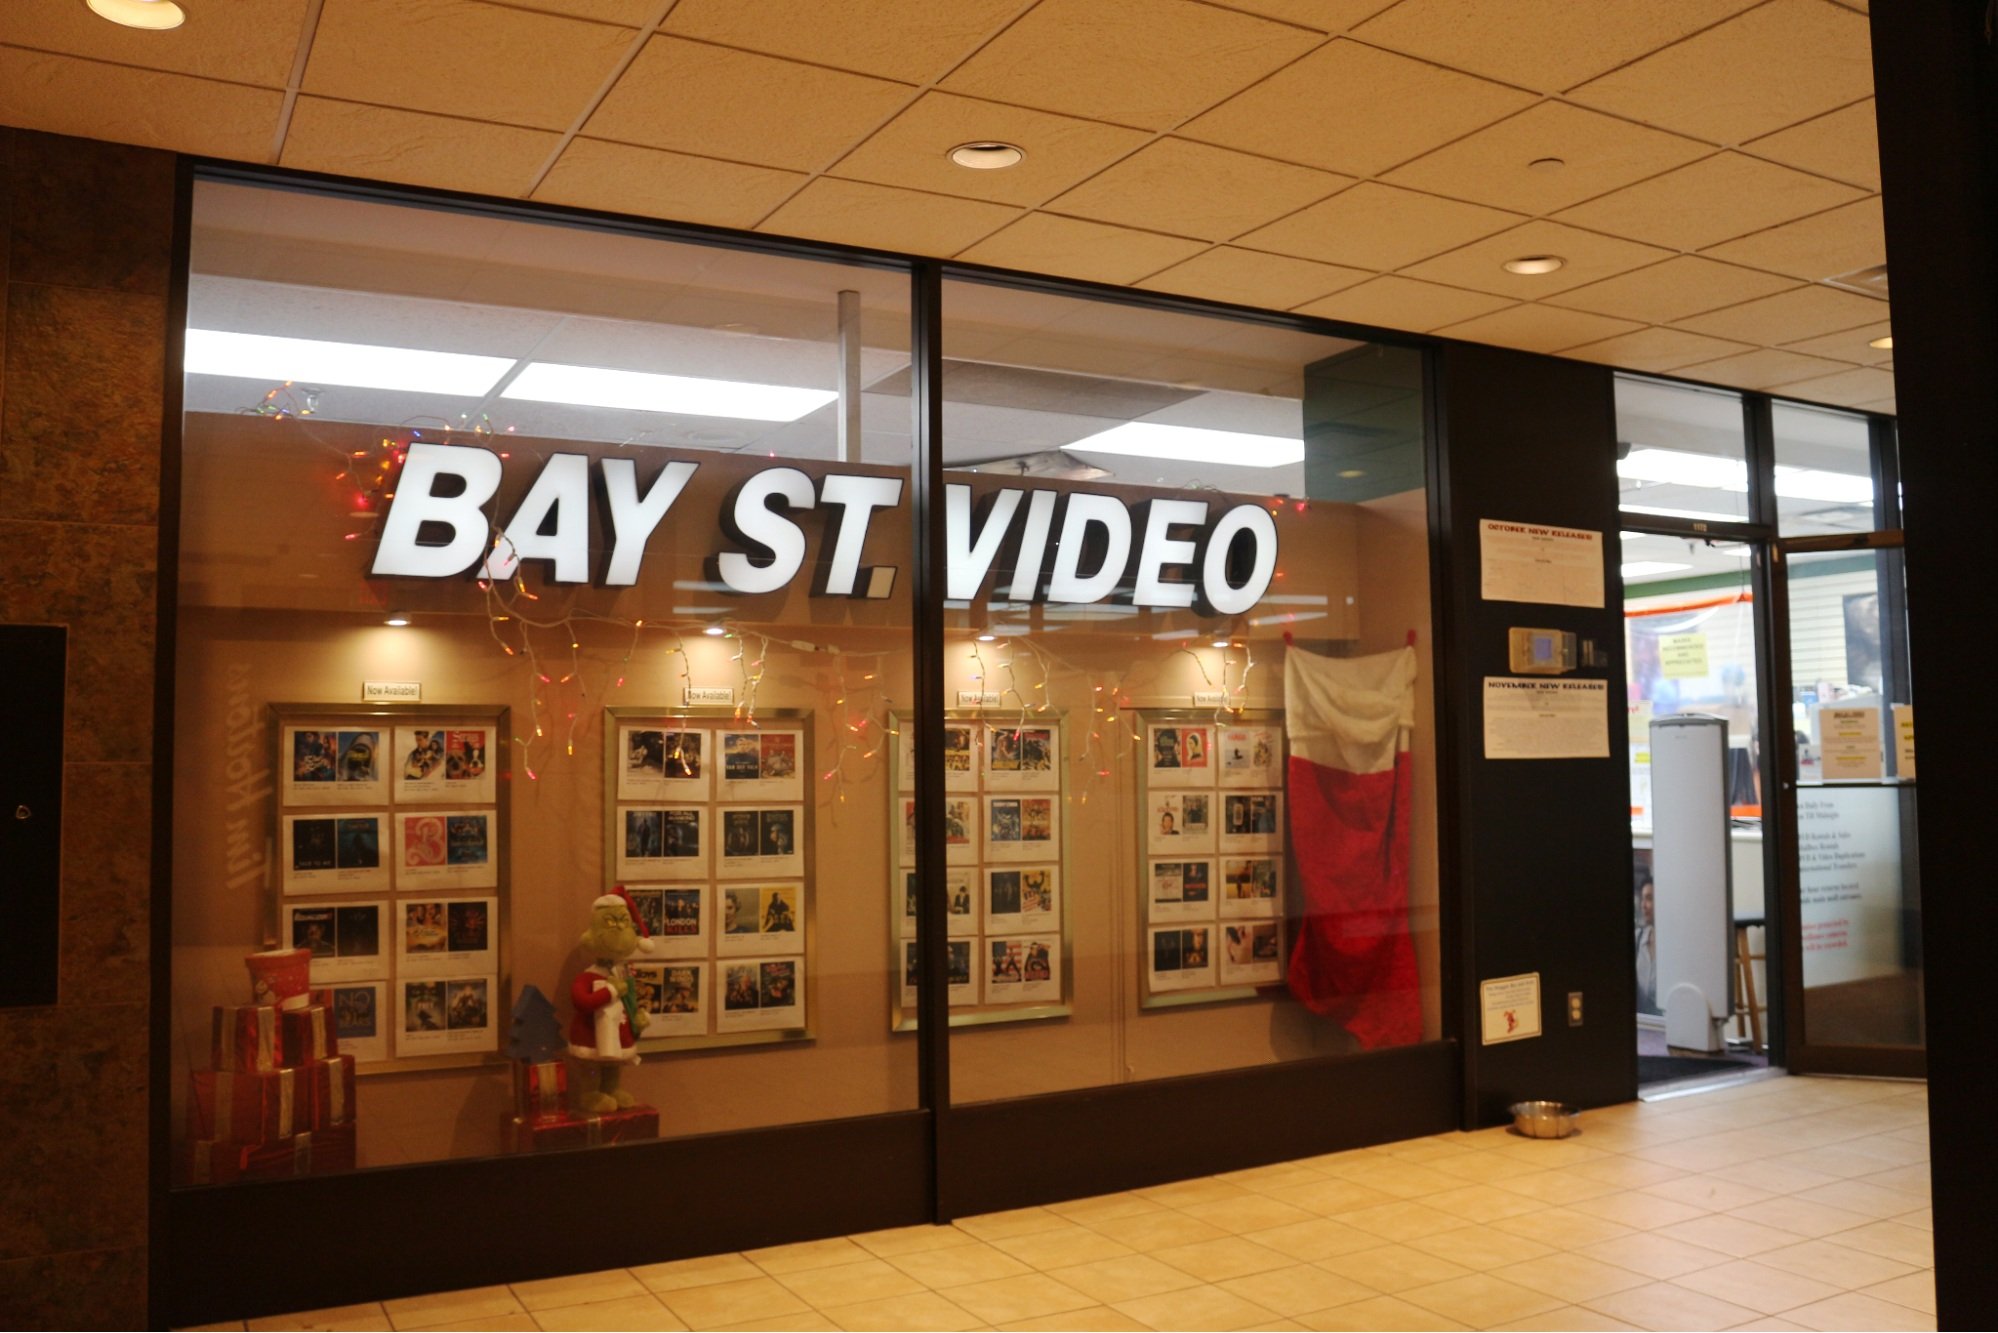  The Bay St Video window display is filled with Christmas decorations and movie posters. 